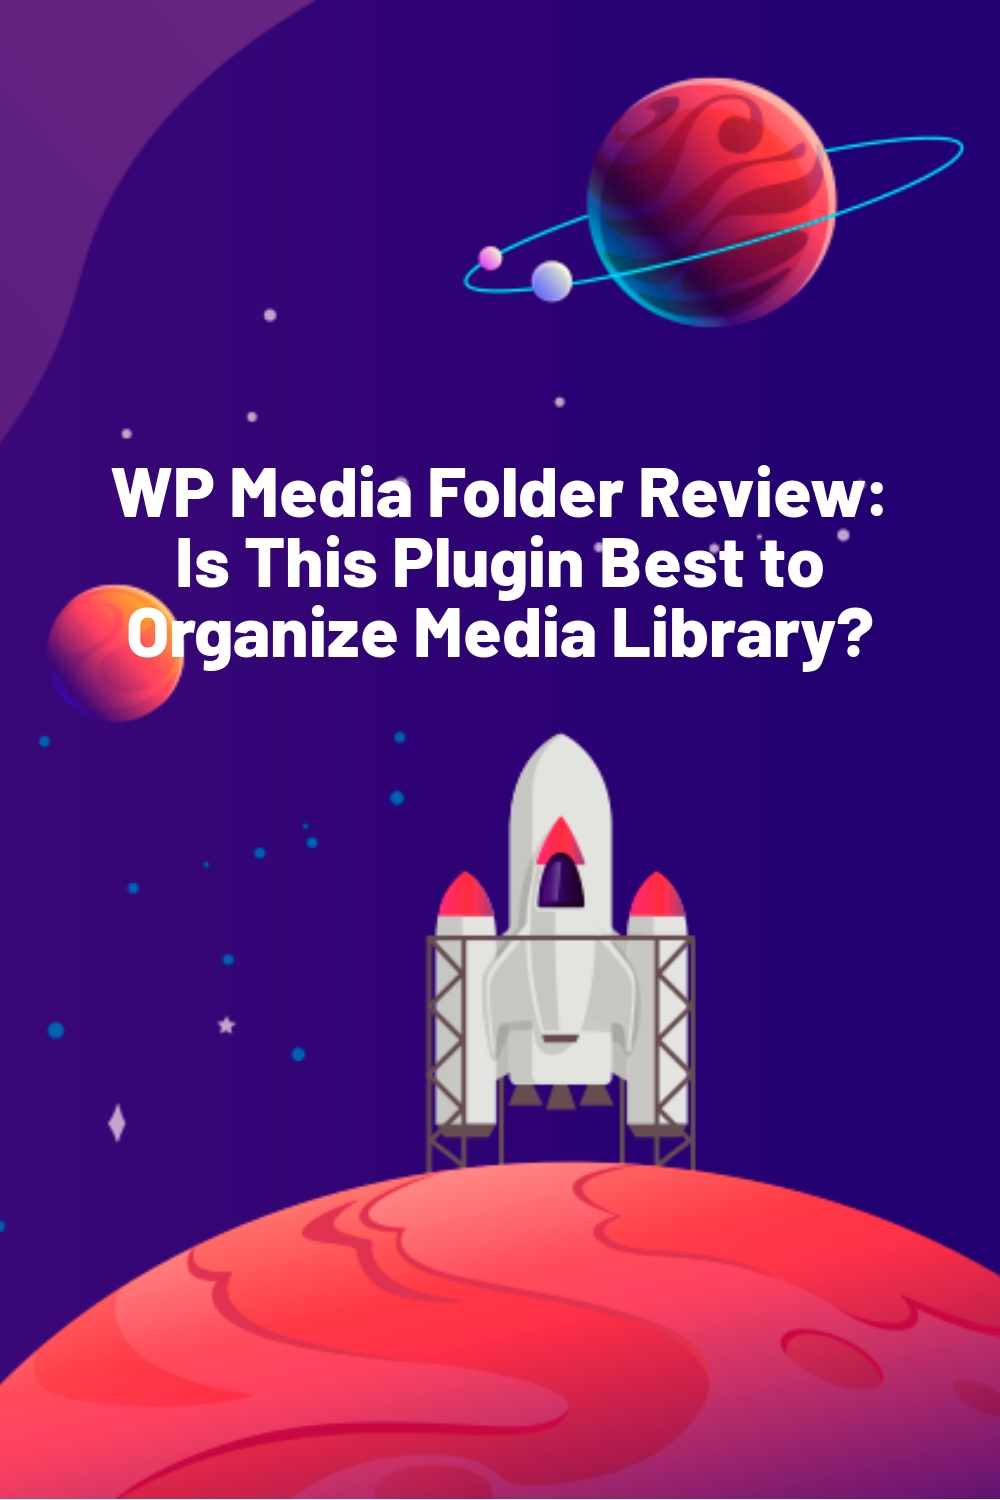 WP Media Folder Review: Is This Plugin Best to Organize Media Library?